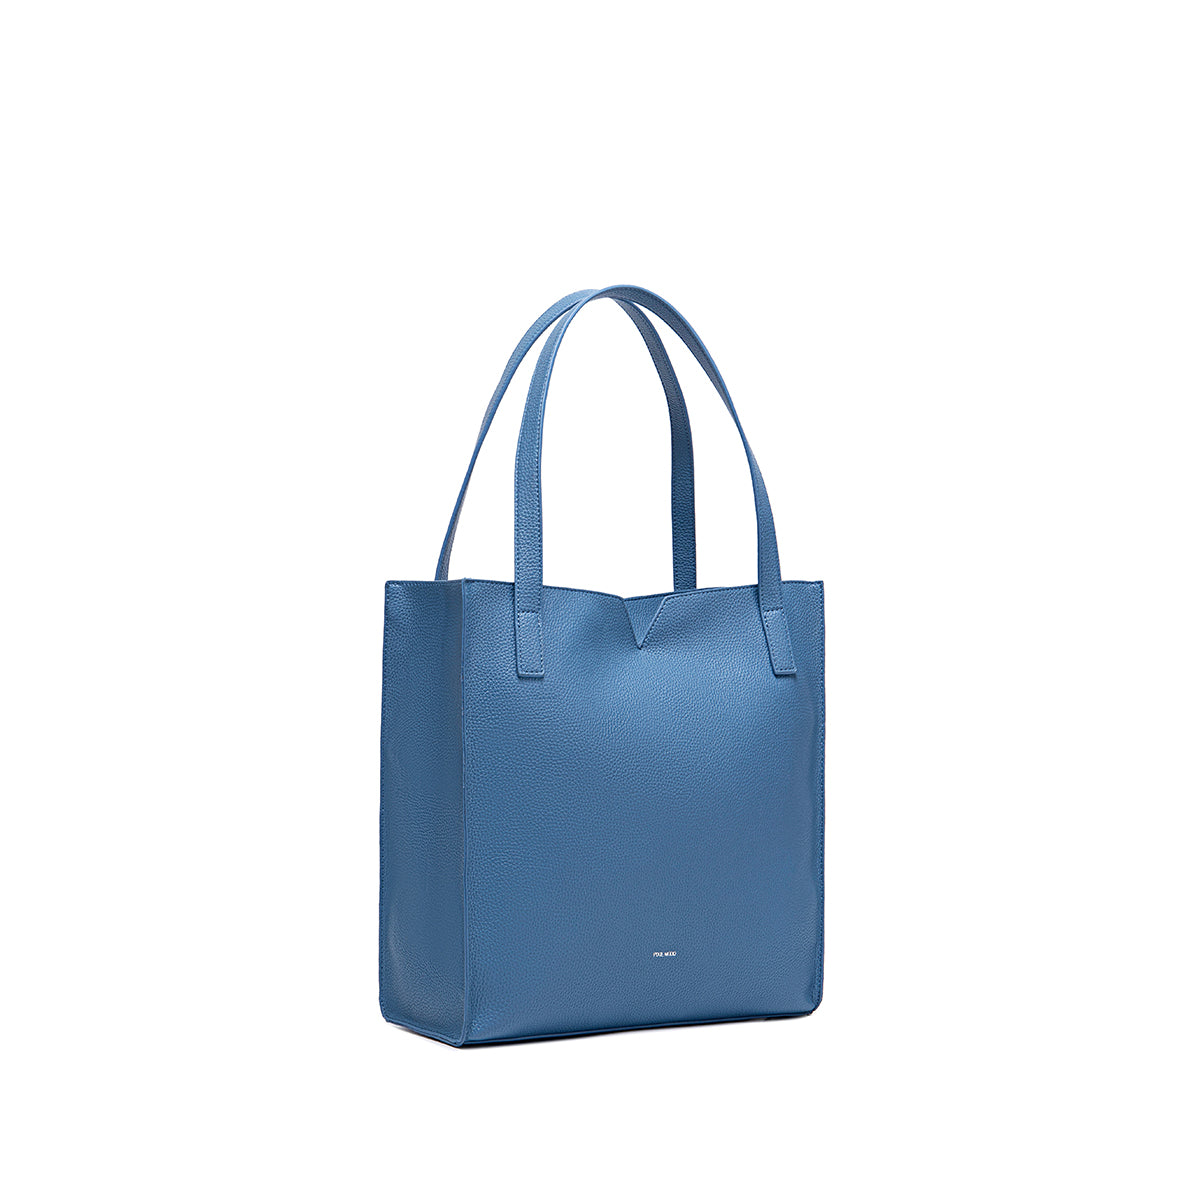 PM Alicia Tote Muted Blue Pebbled